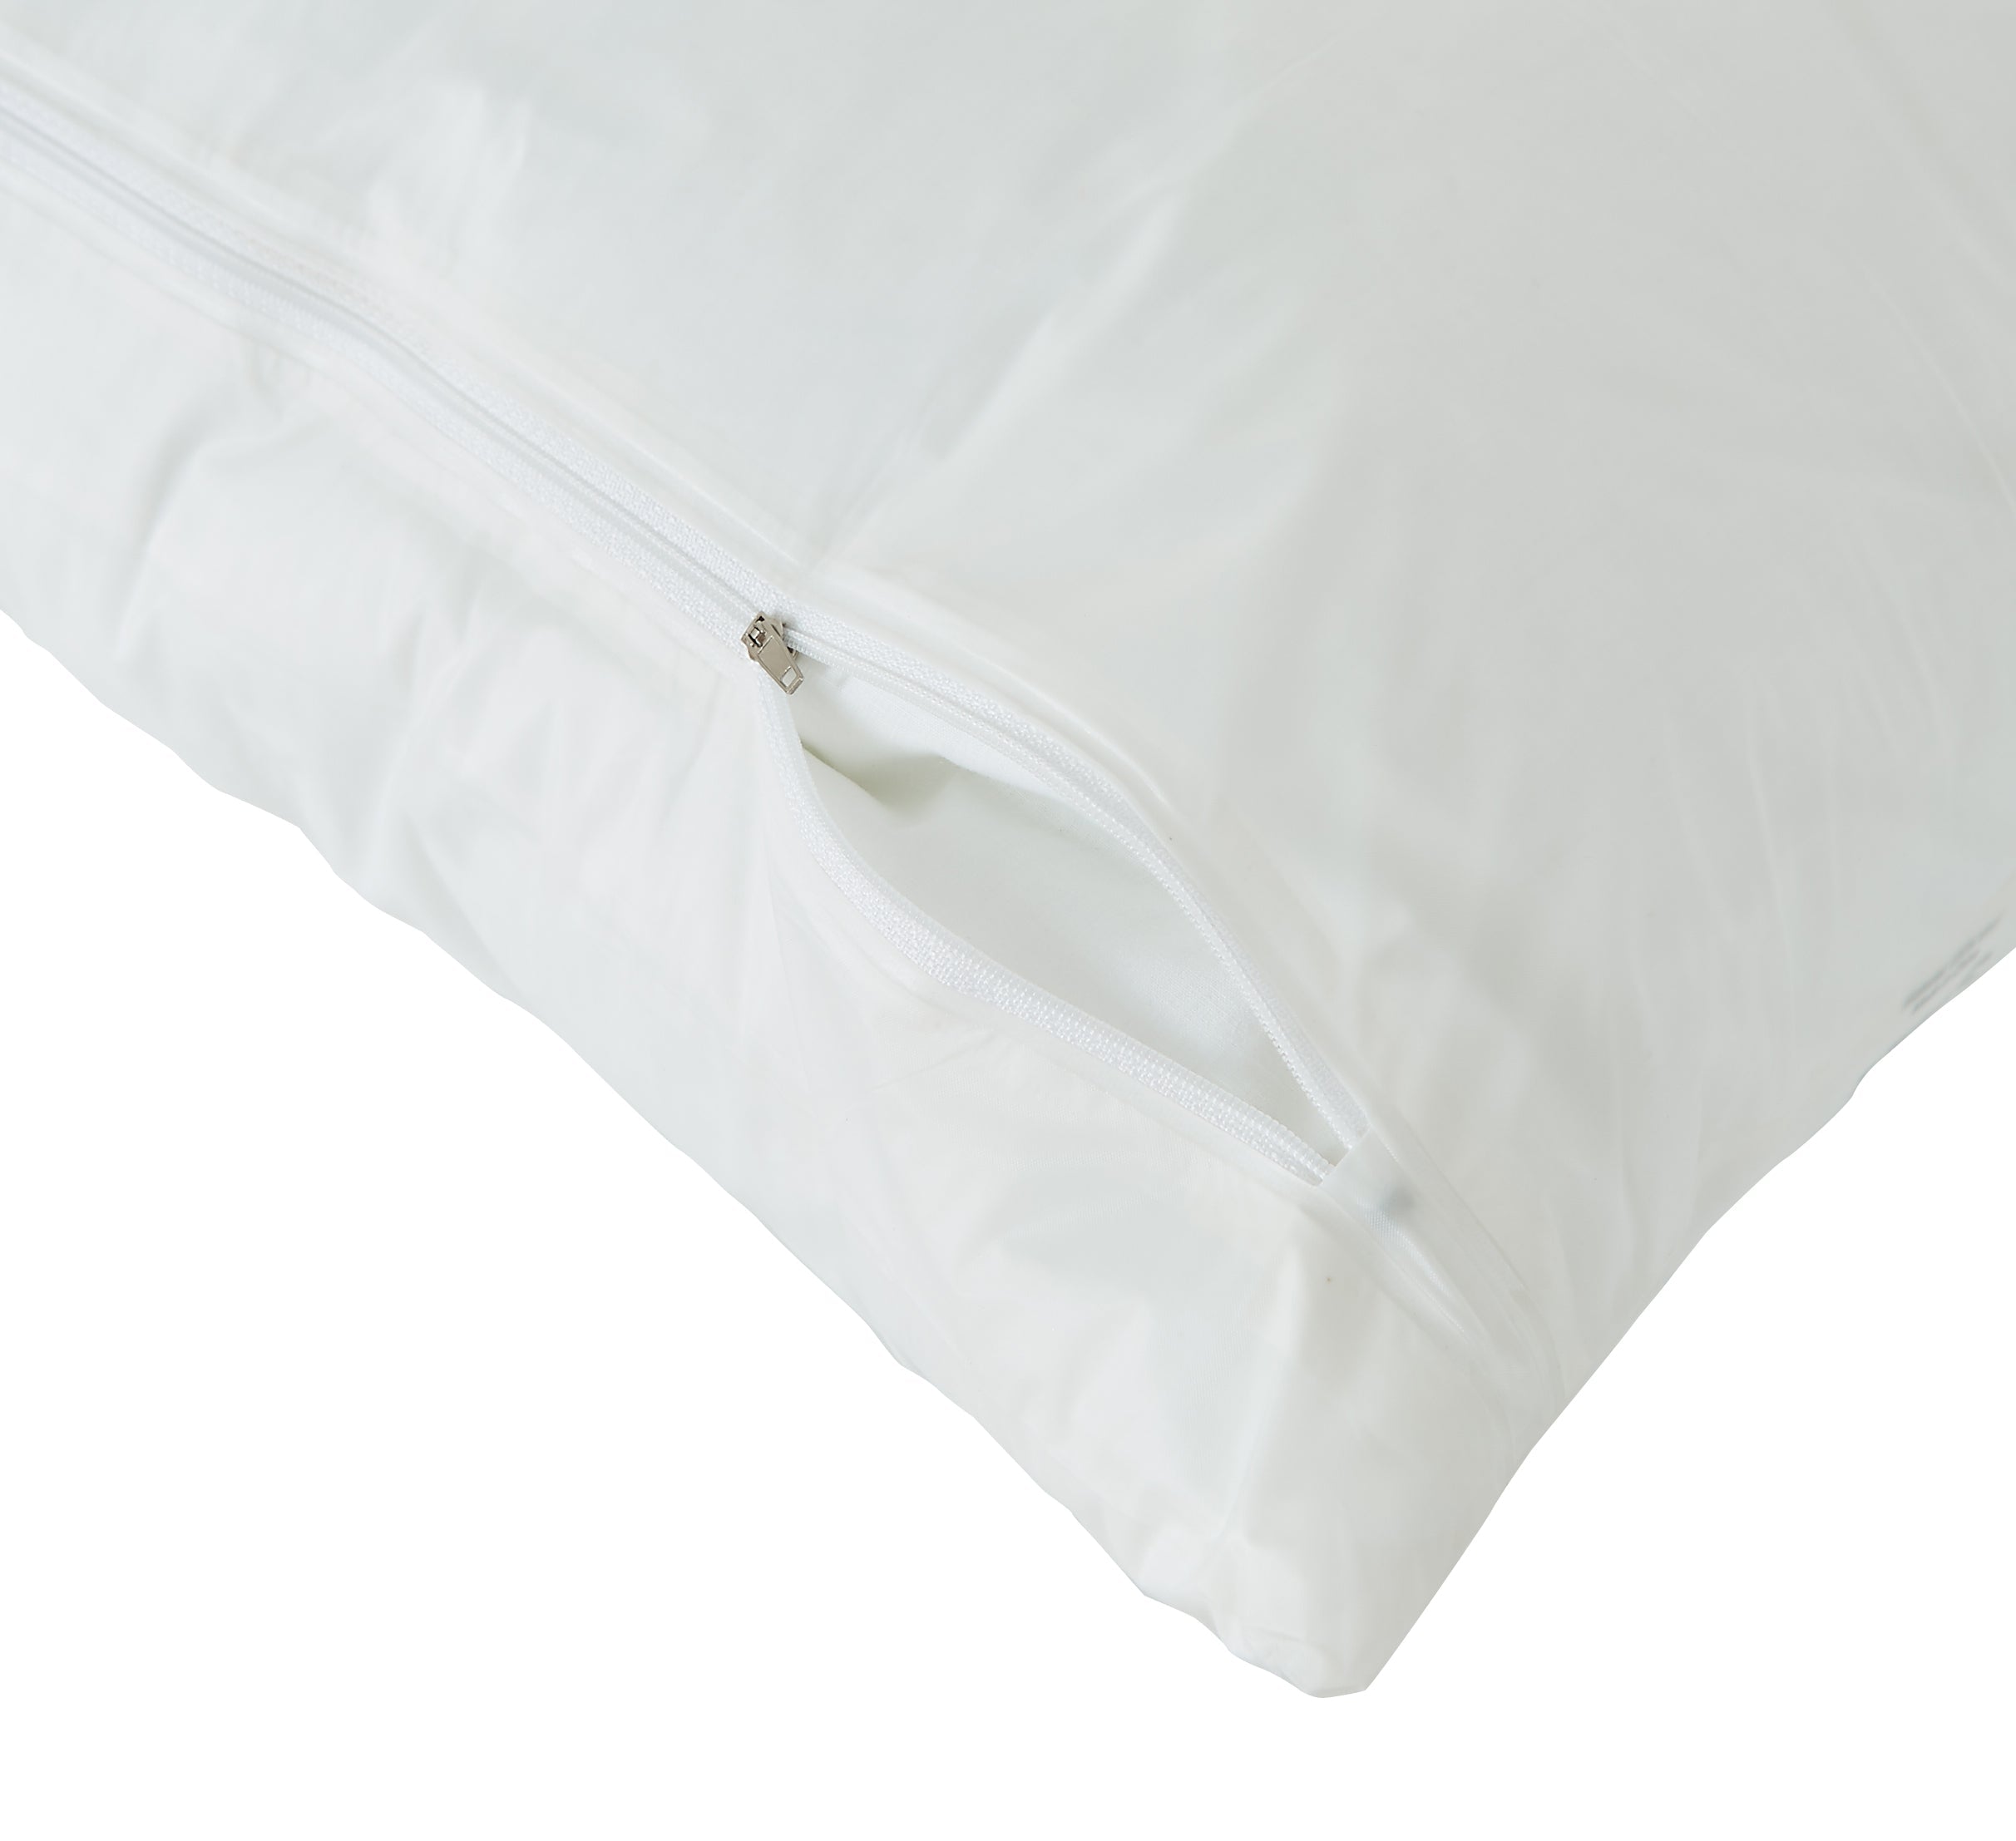 6 Gauge Vinyl Zippered Pillow Protectors - The BedBug Solution™ for Your Pillows - Packed in Pairs Pillow Protector Bargoose Home Textiles, Inc. 